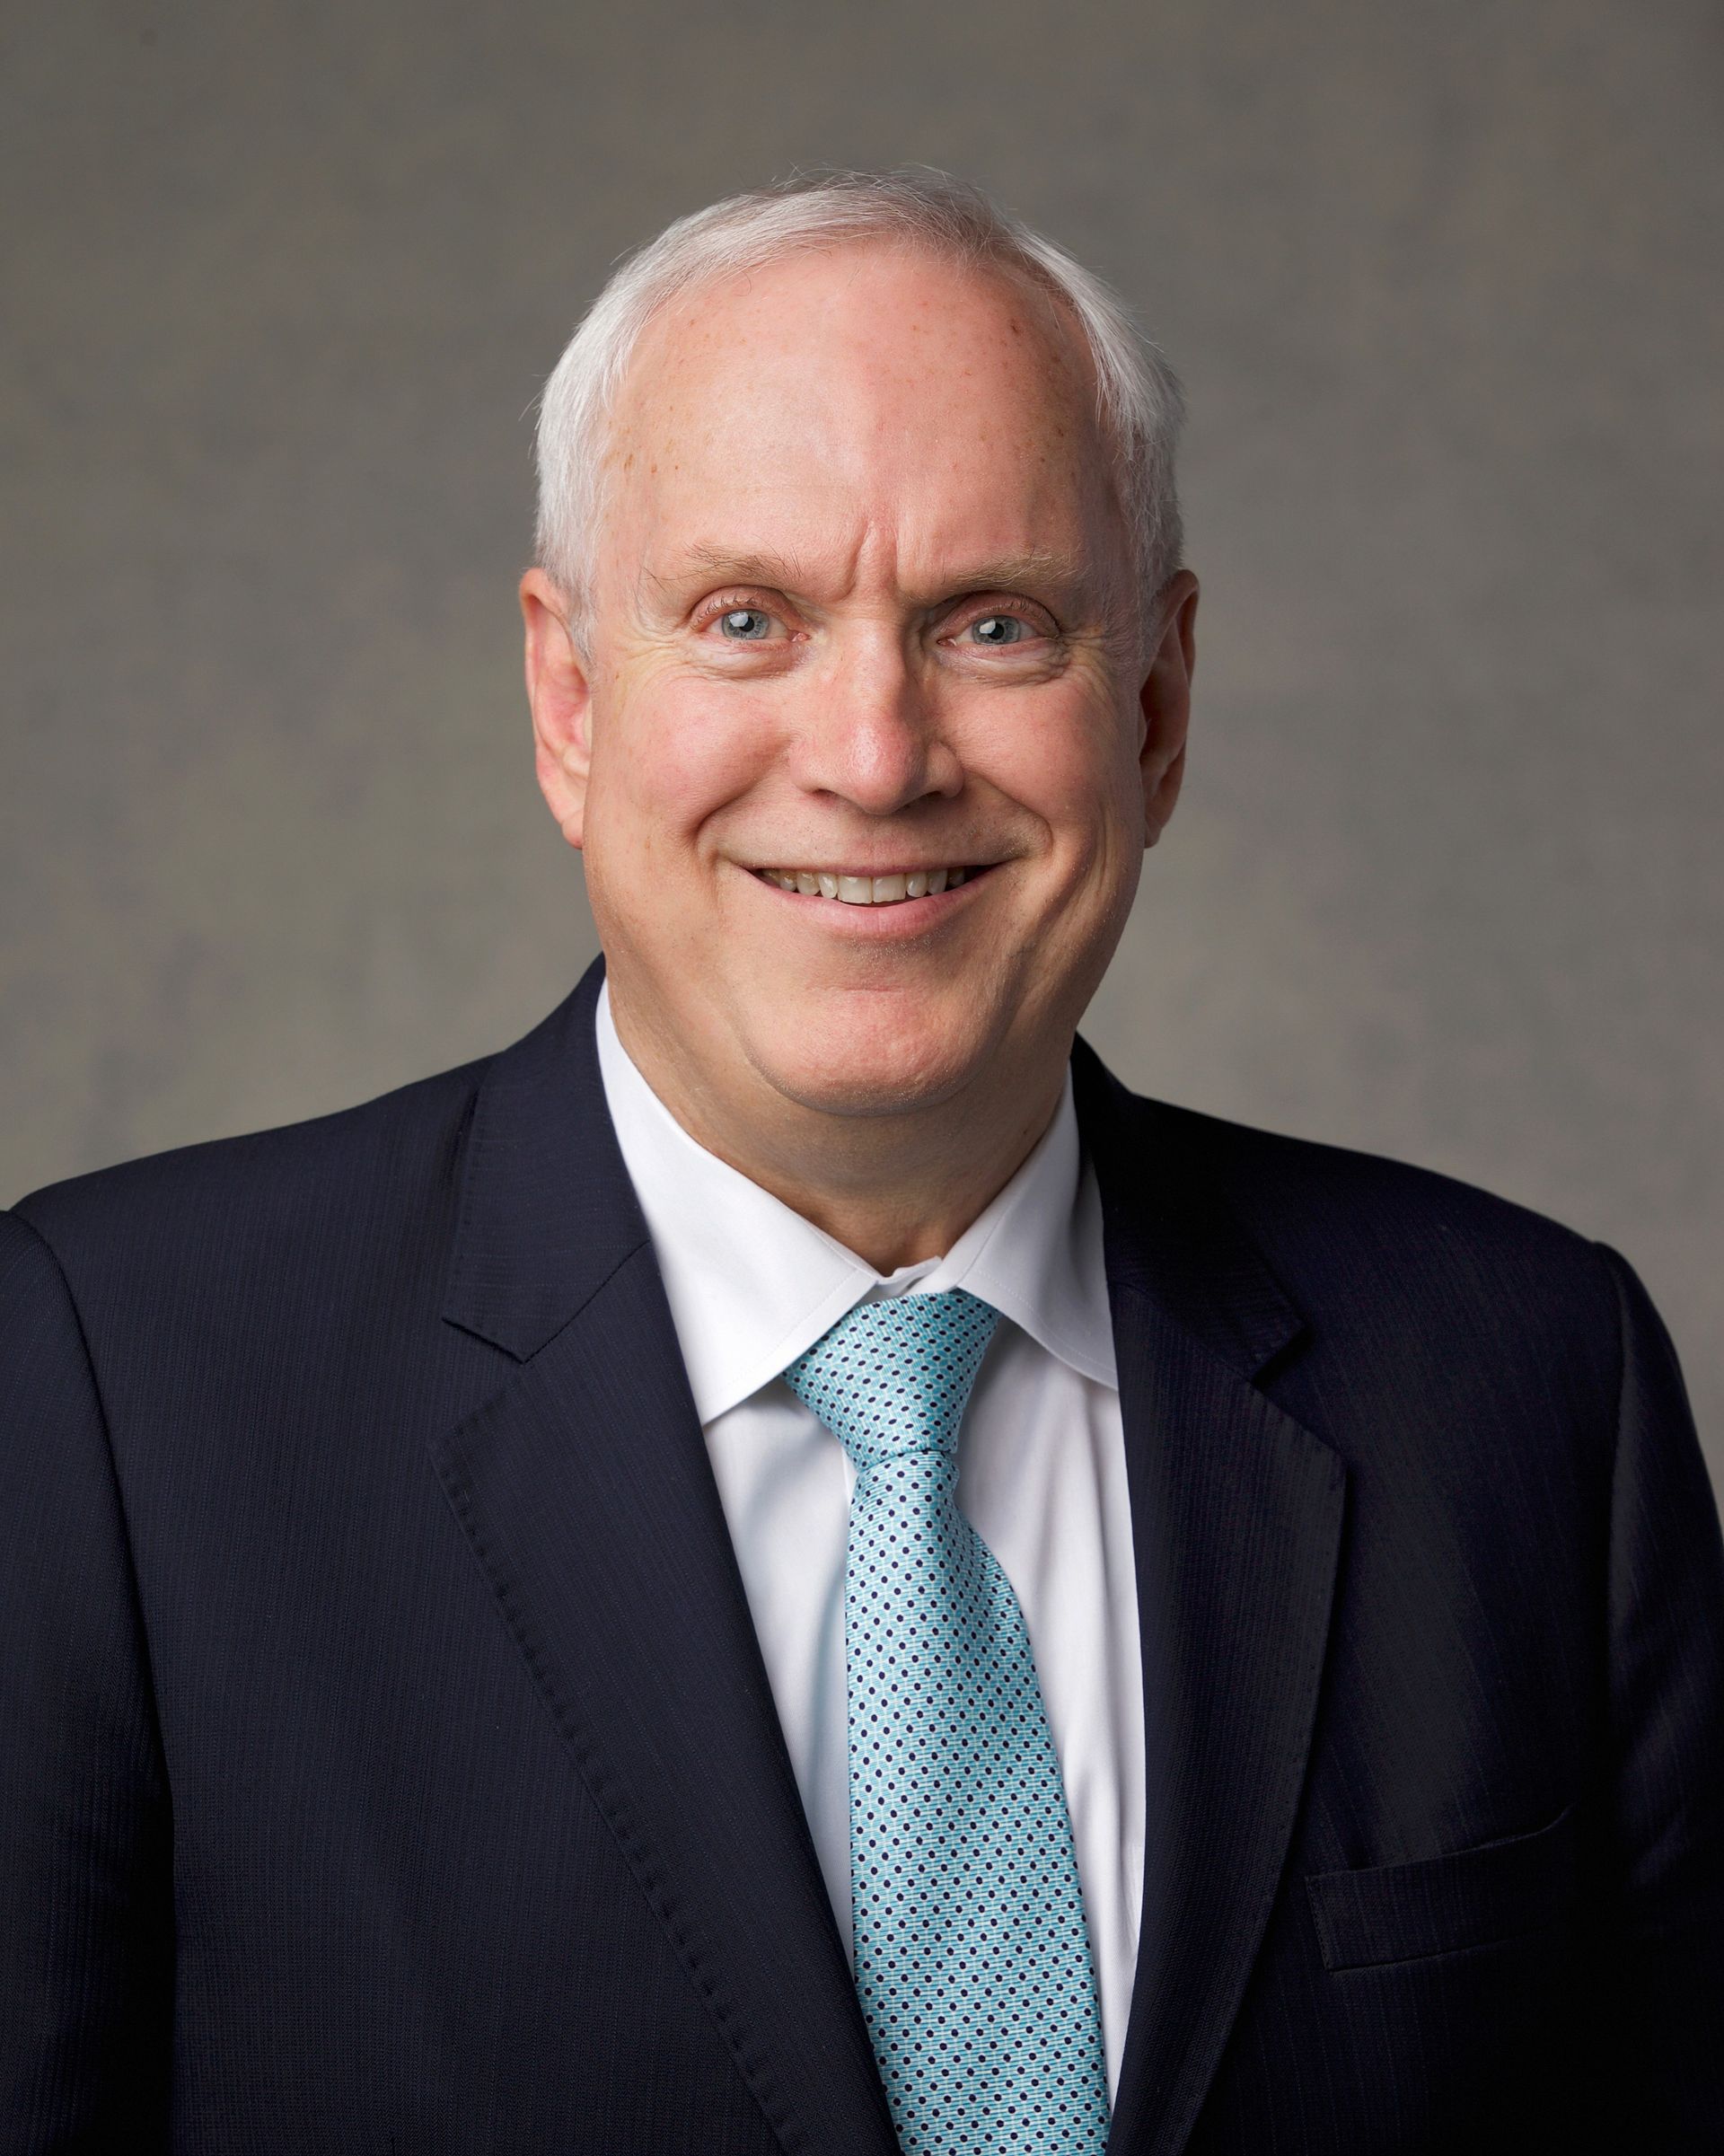 The official portrait of Elder Robert C. Gay of the Presidency of the Seventy of The Church of Jesus Christ of Latter-day Saints.